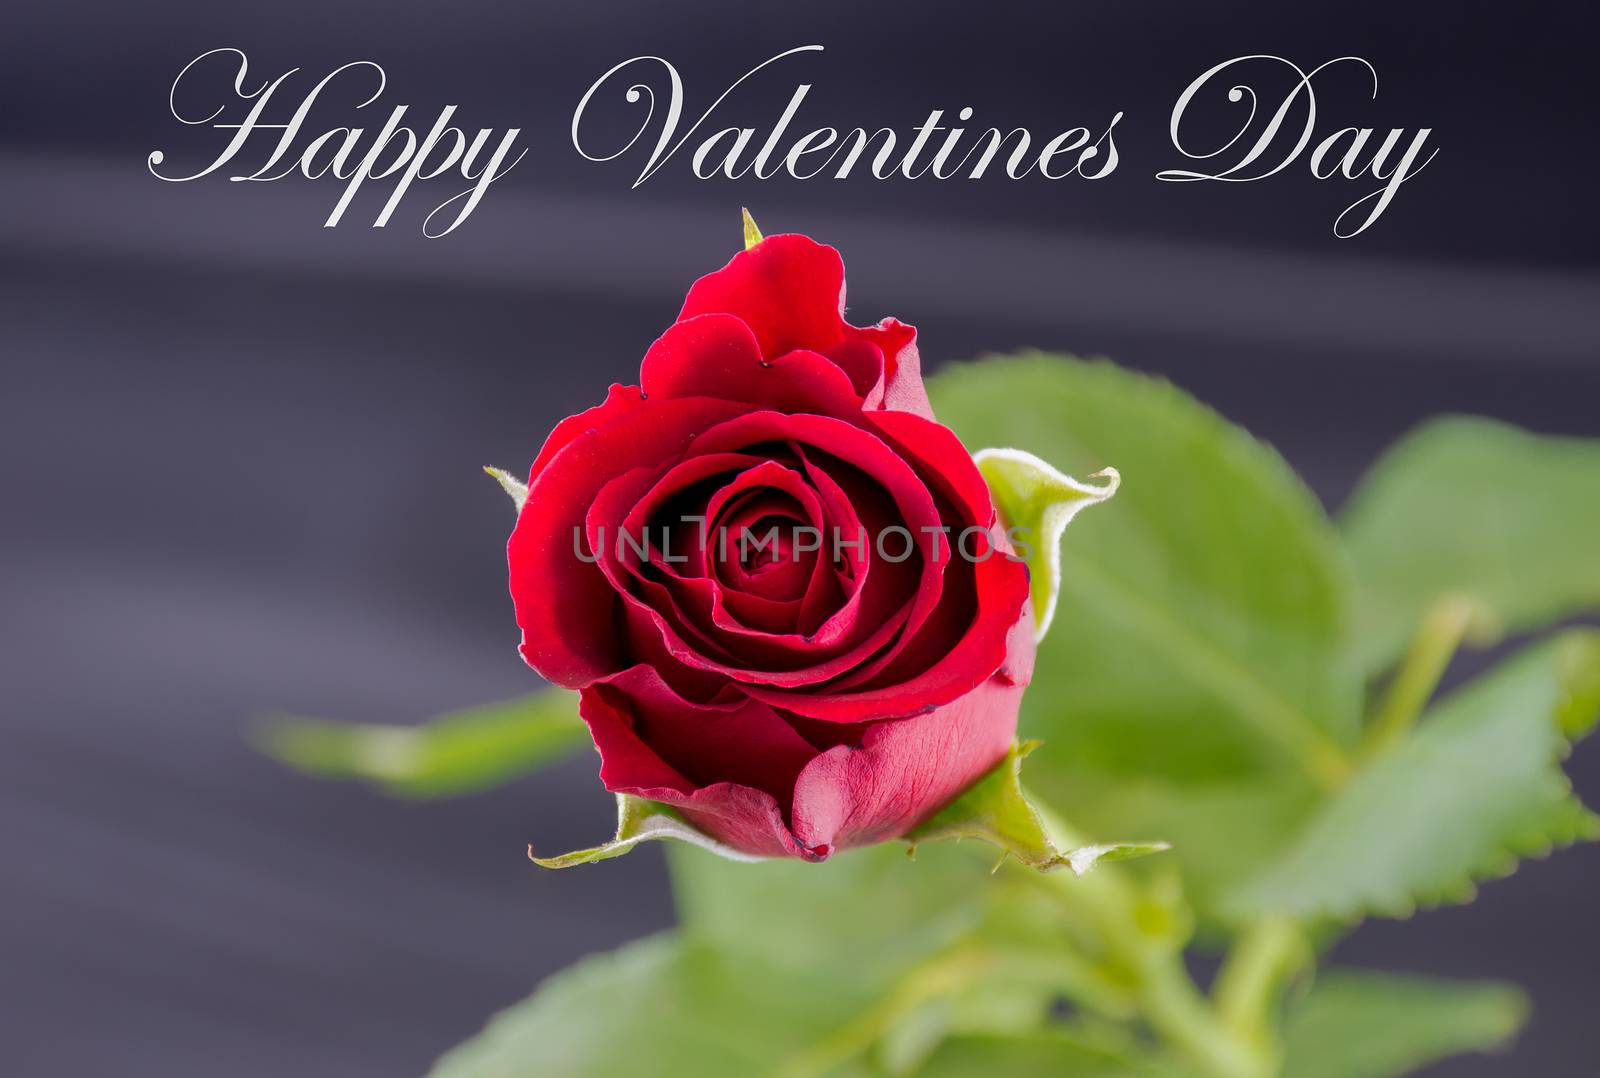 Red Rose - Happy Valentines Day